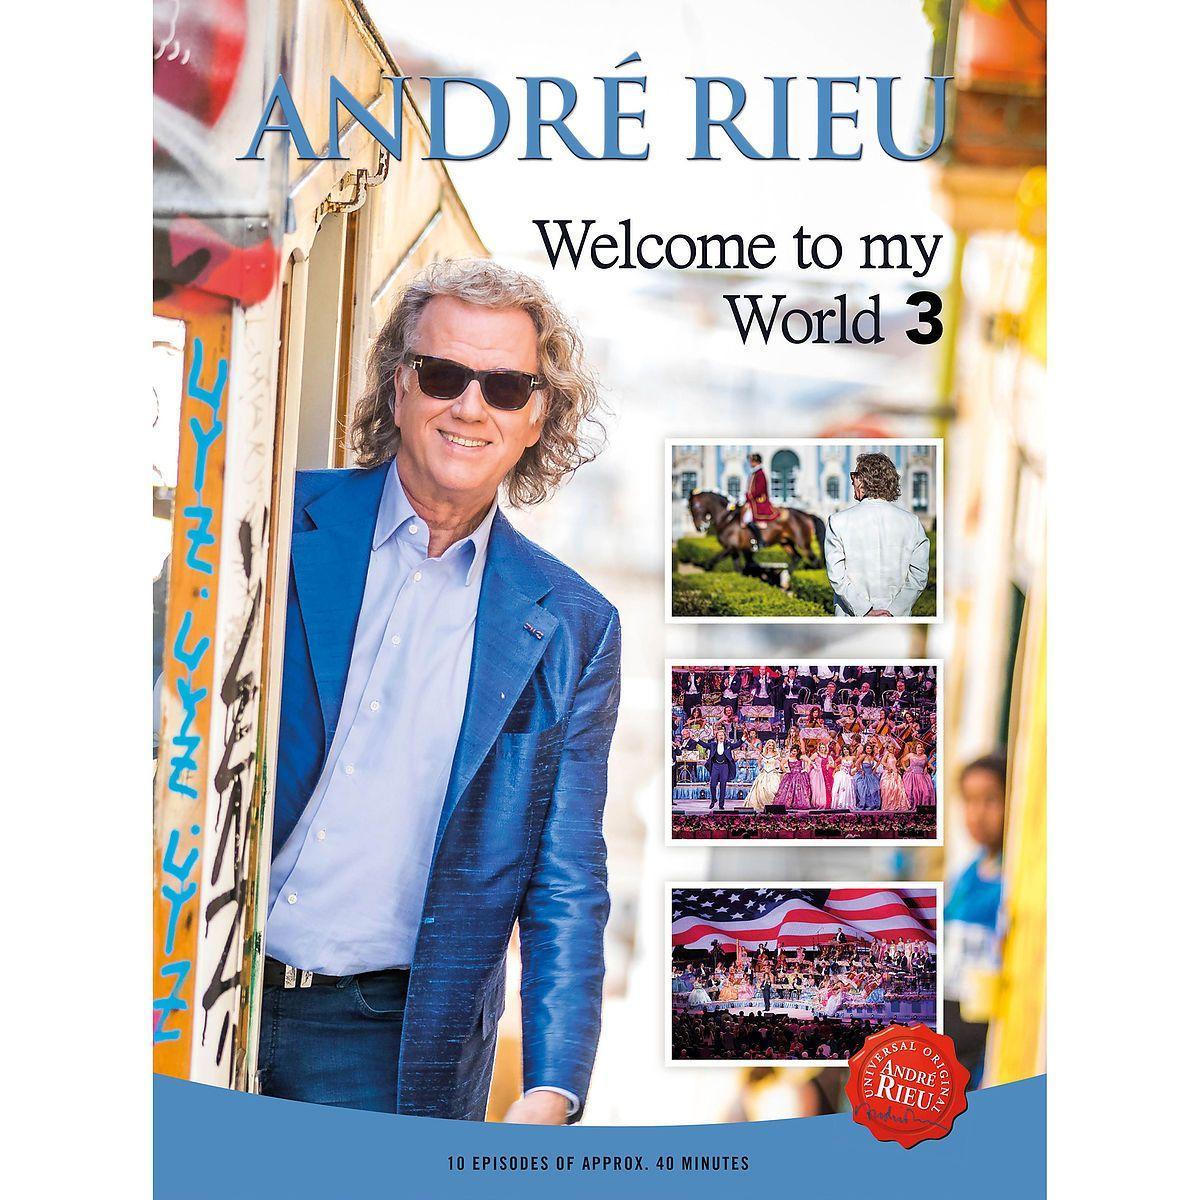 Videoclip André Rieu: Welcome To My World 3 (3-DVD-Set) 